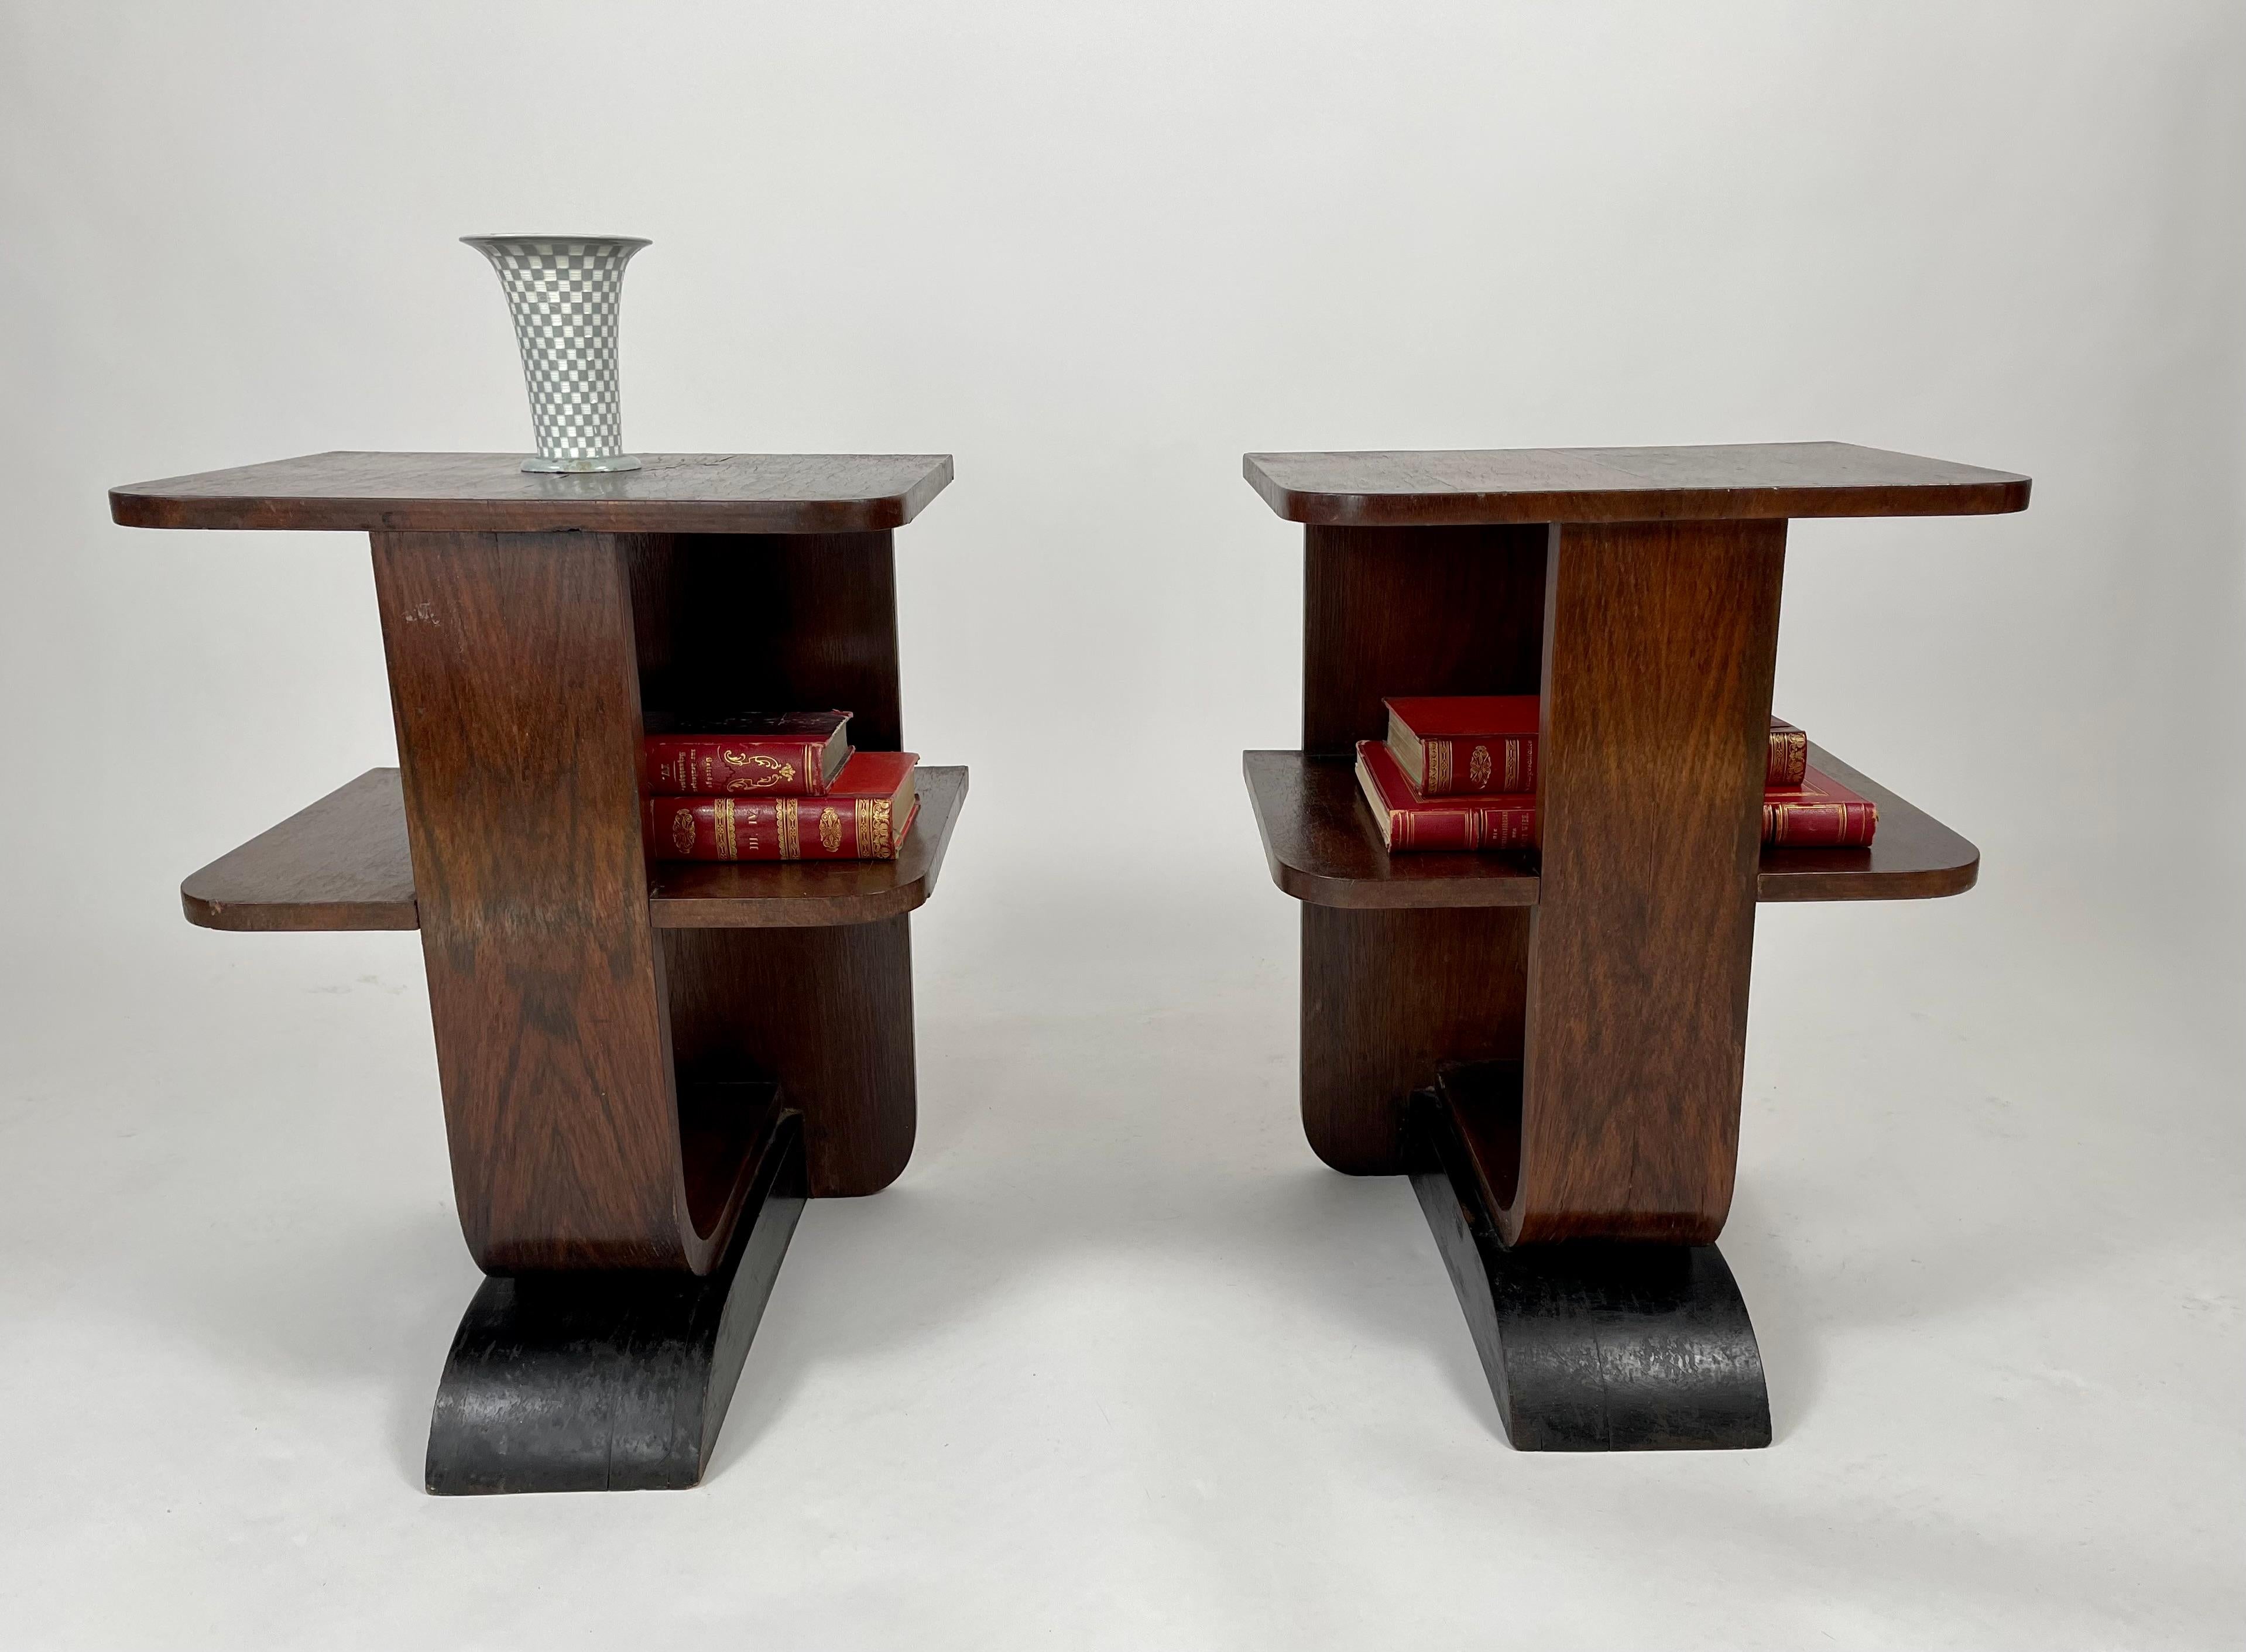 A pair of small scale Art Deco period end tables or night stands, the tops with book matched walnut veneers over a central shelf, with an ebonized curved base, With their sculptural form and good lines, these tables would be good individually next